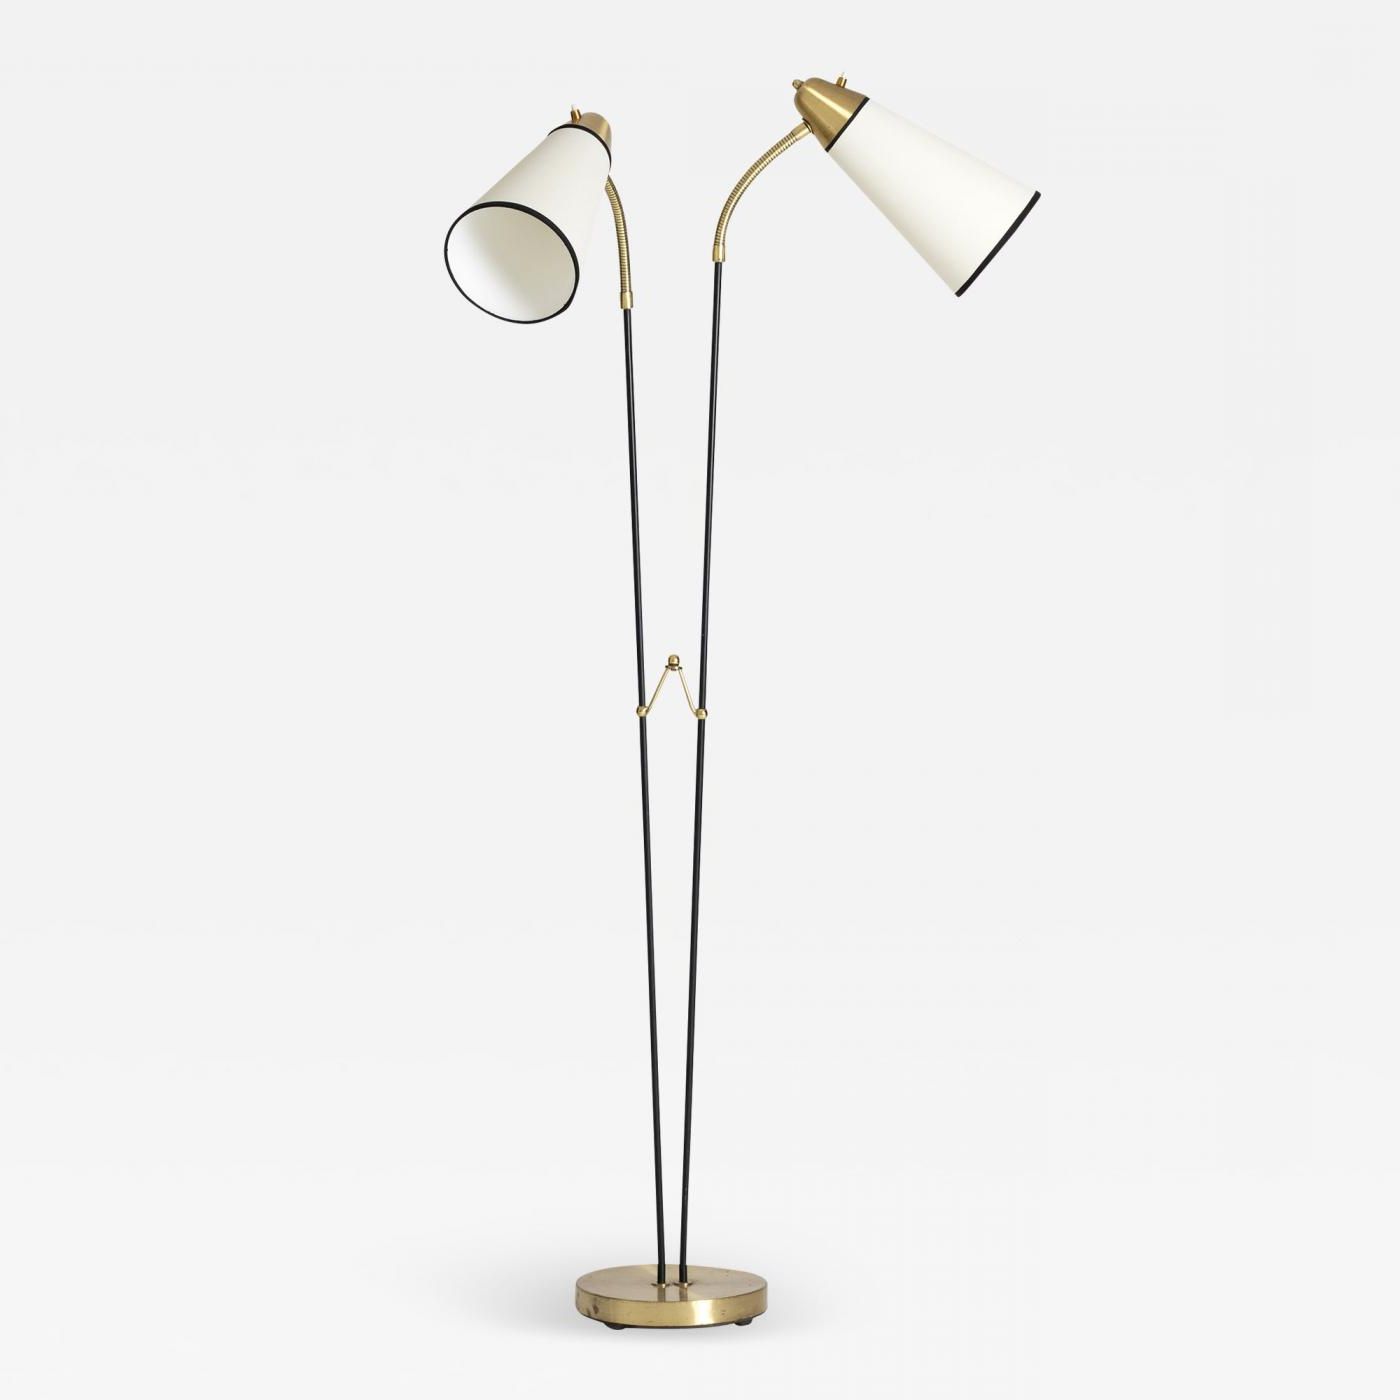 Midcentury Brass And Black Two Arm Floor Lamp Regarding Popular 2 Arm Standing Lamps (View 2 of 10)